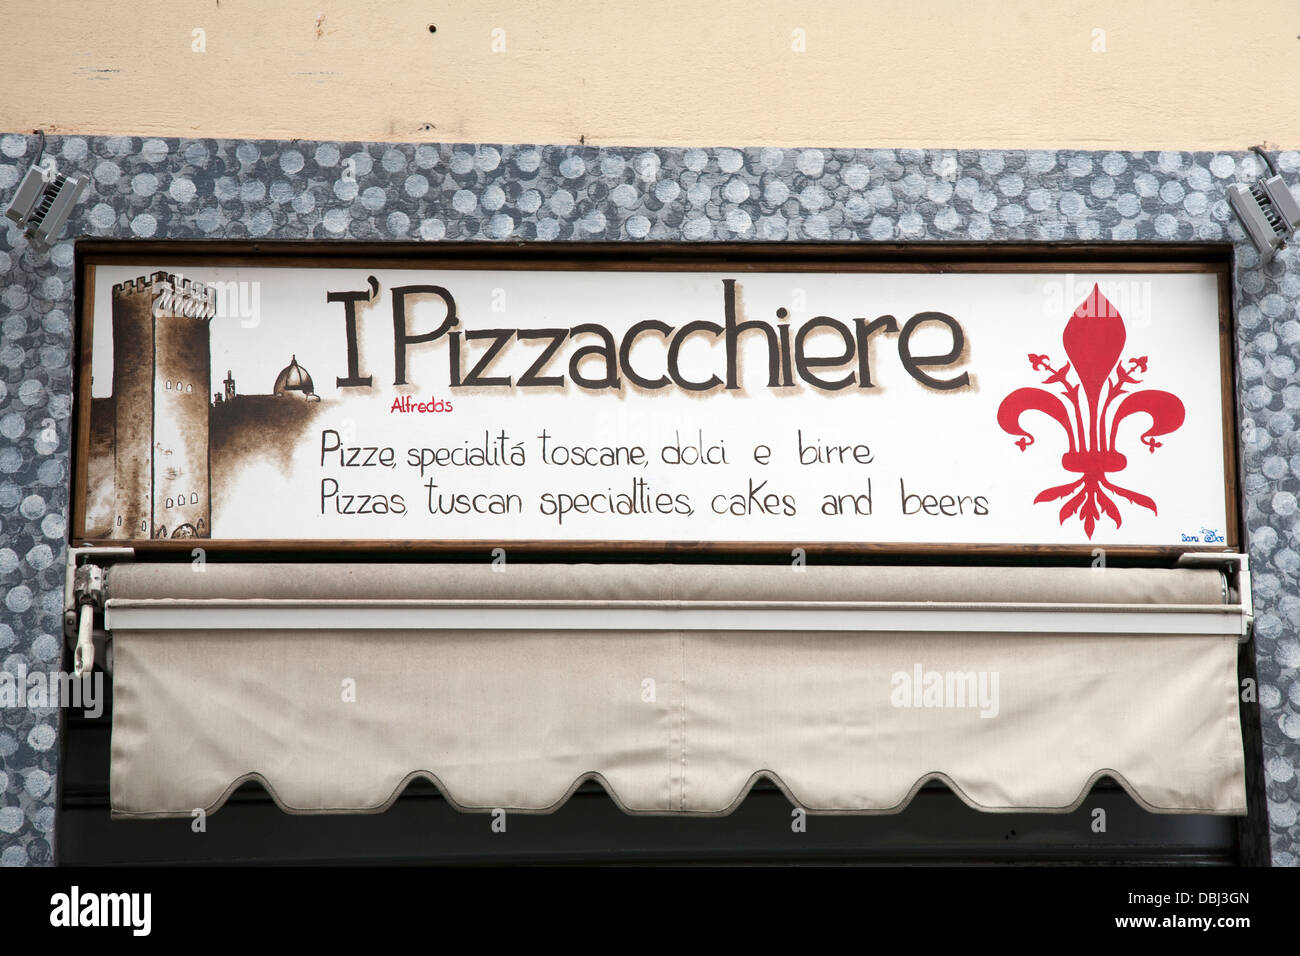 Pizzacchiere Pizzaria Restaurant, Sign, Florence, Tuscany, Italy Stock Photo